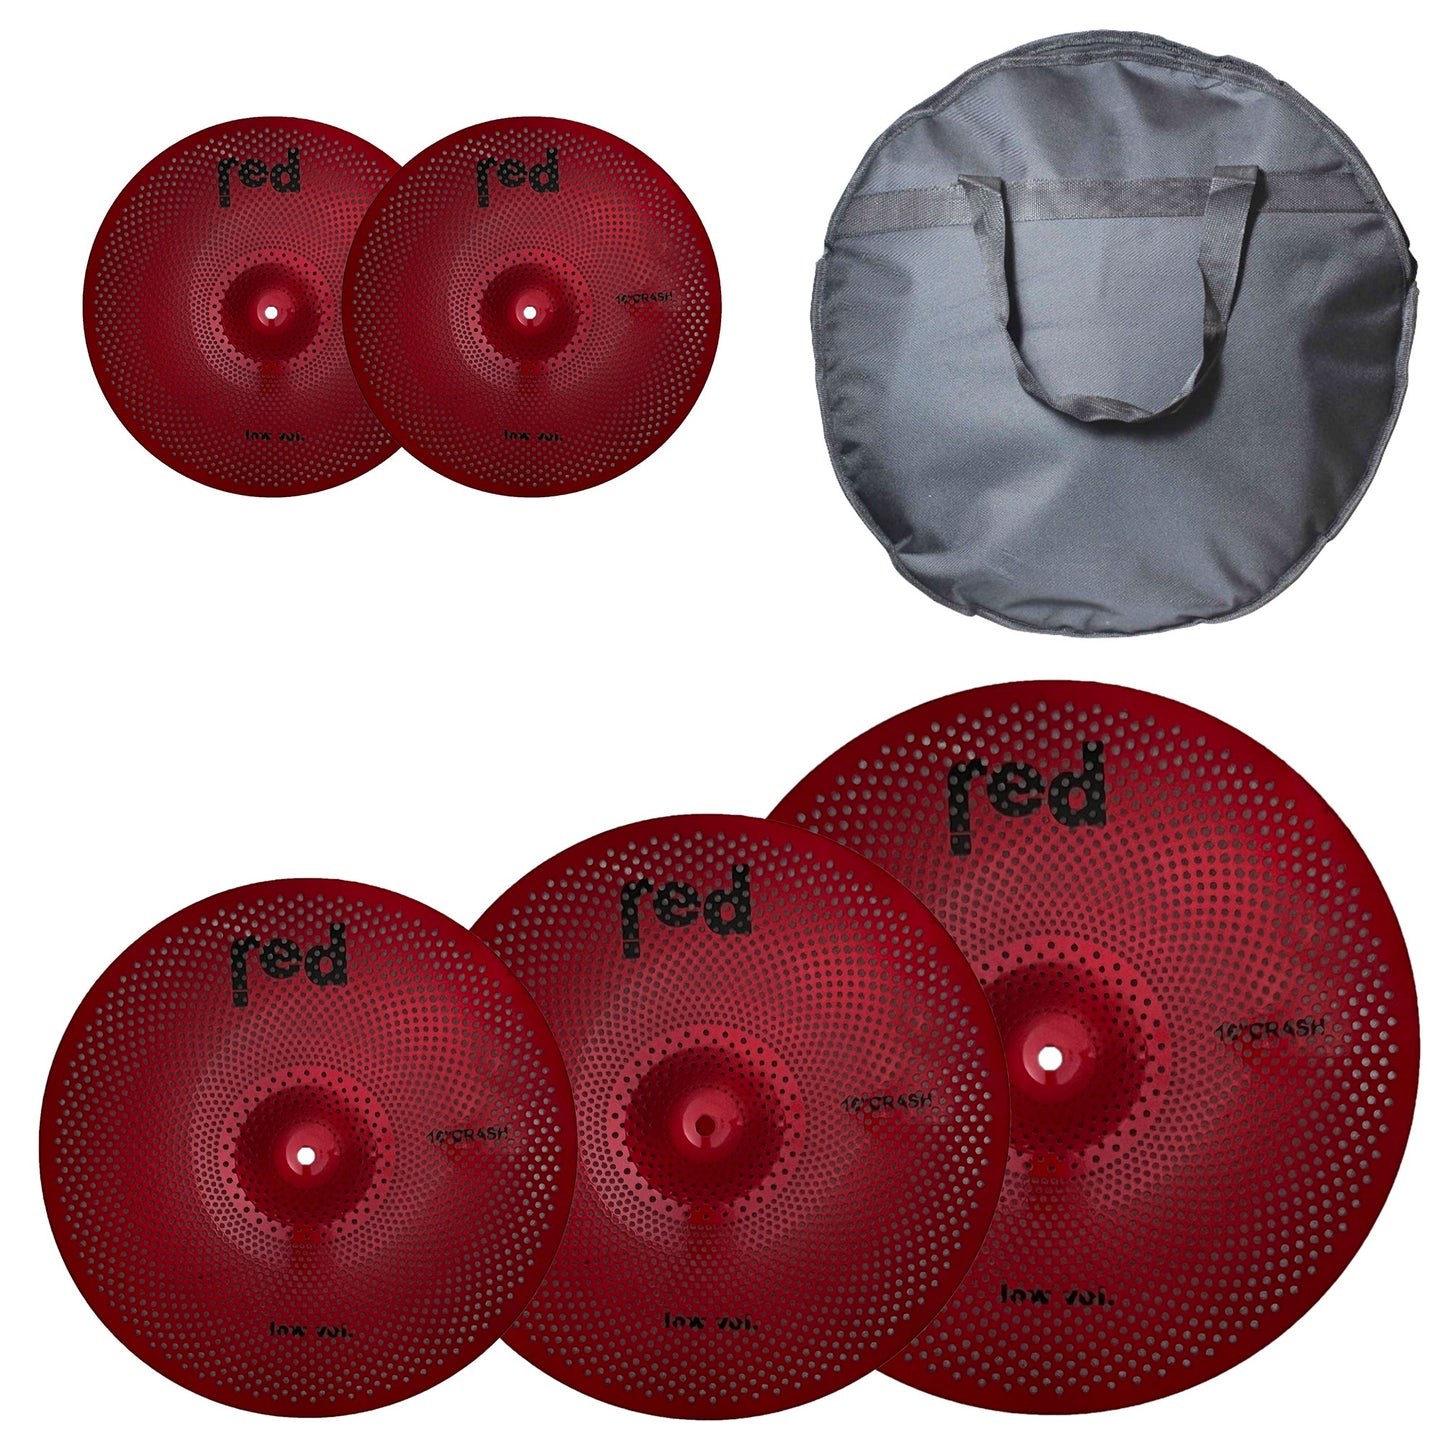 Red Low Volume 5 piece Cymbal Set with free 20" Bag